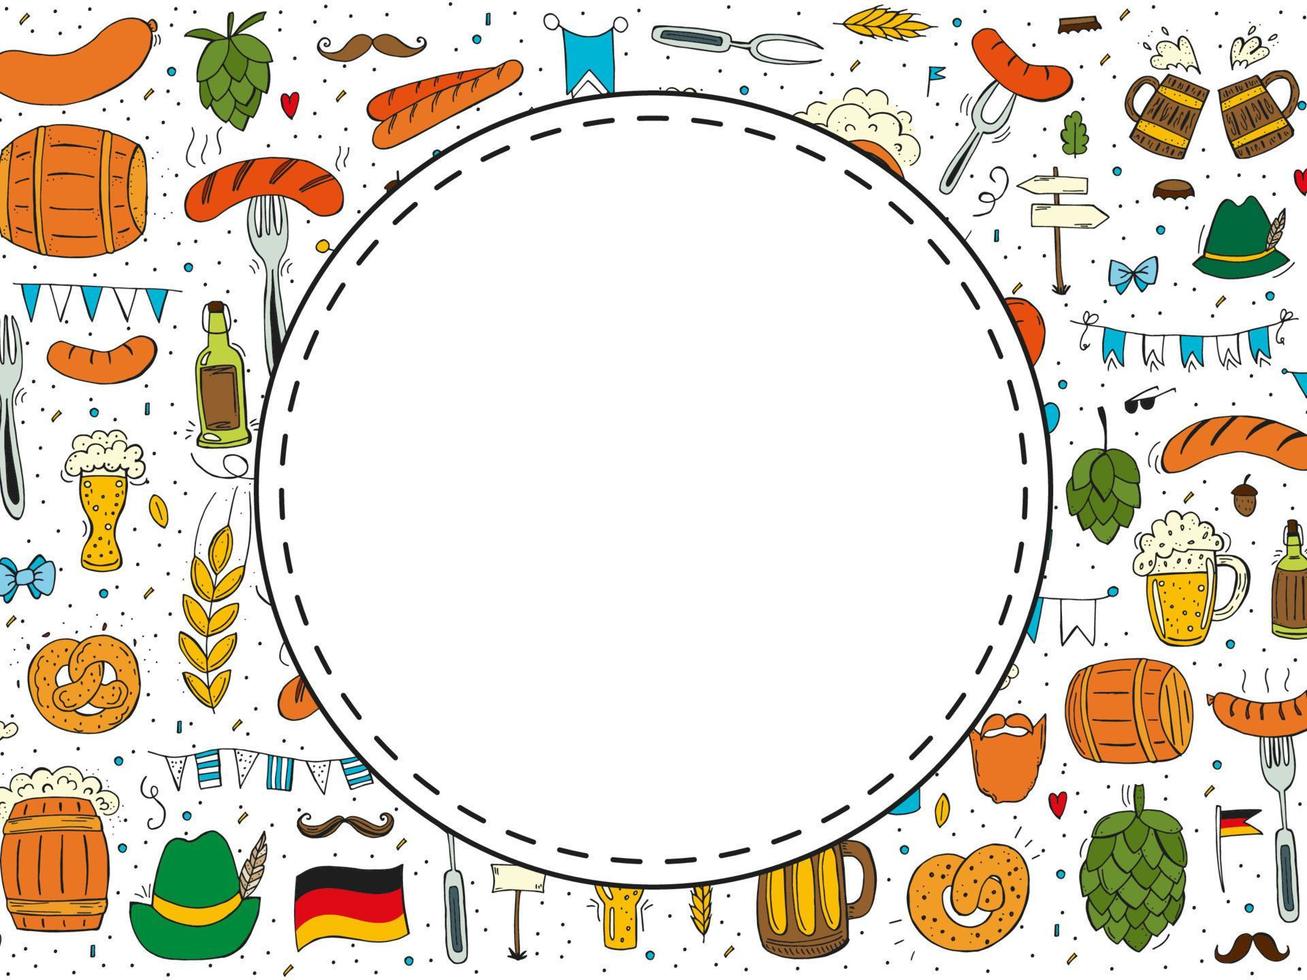 Oktoberfest 2022 - Beer Festival. Hand-drawn Doodle elements. German Traditional holiday. Round emblem on the background of a pattern of colored elements. vector